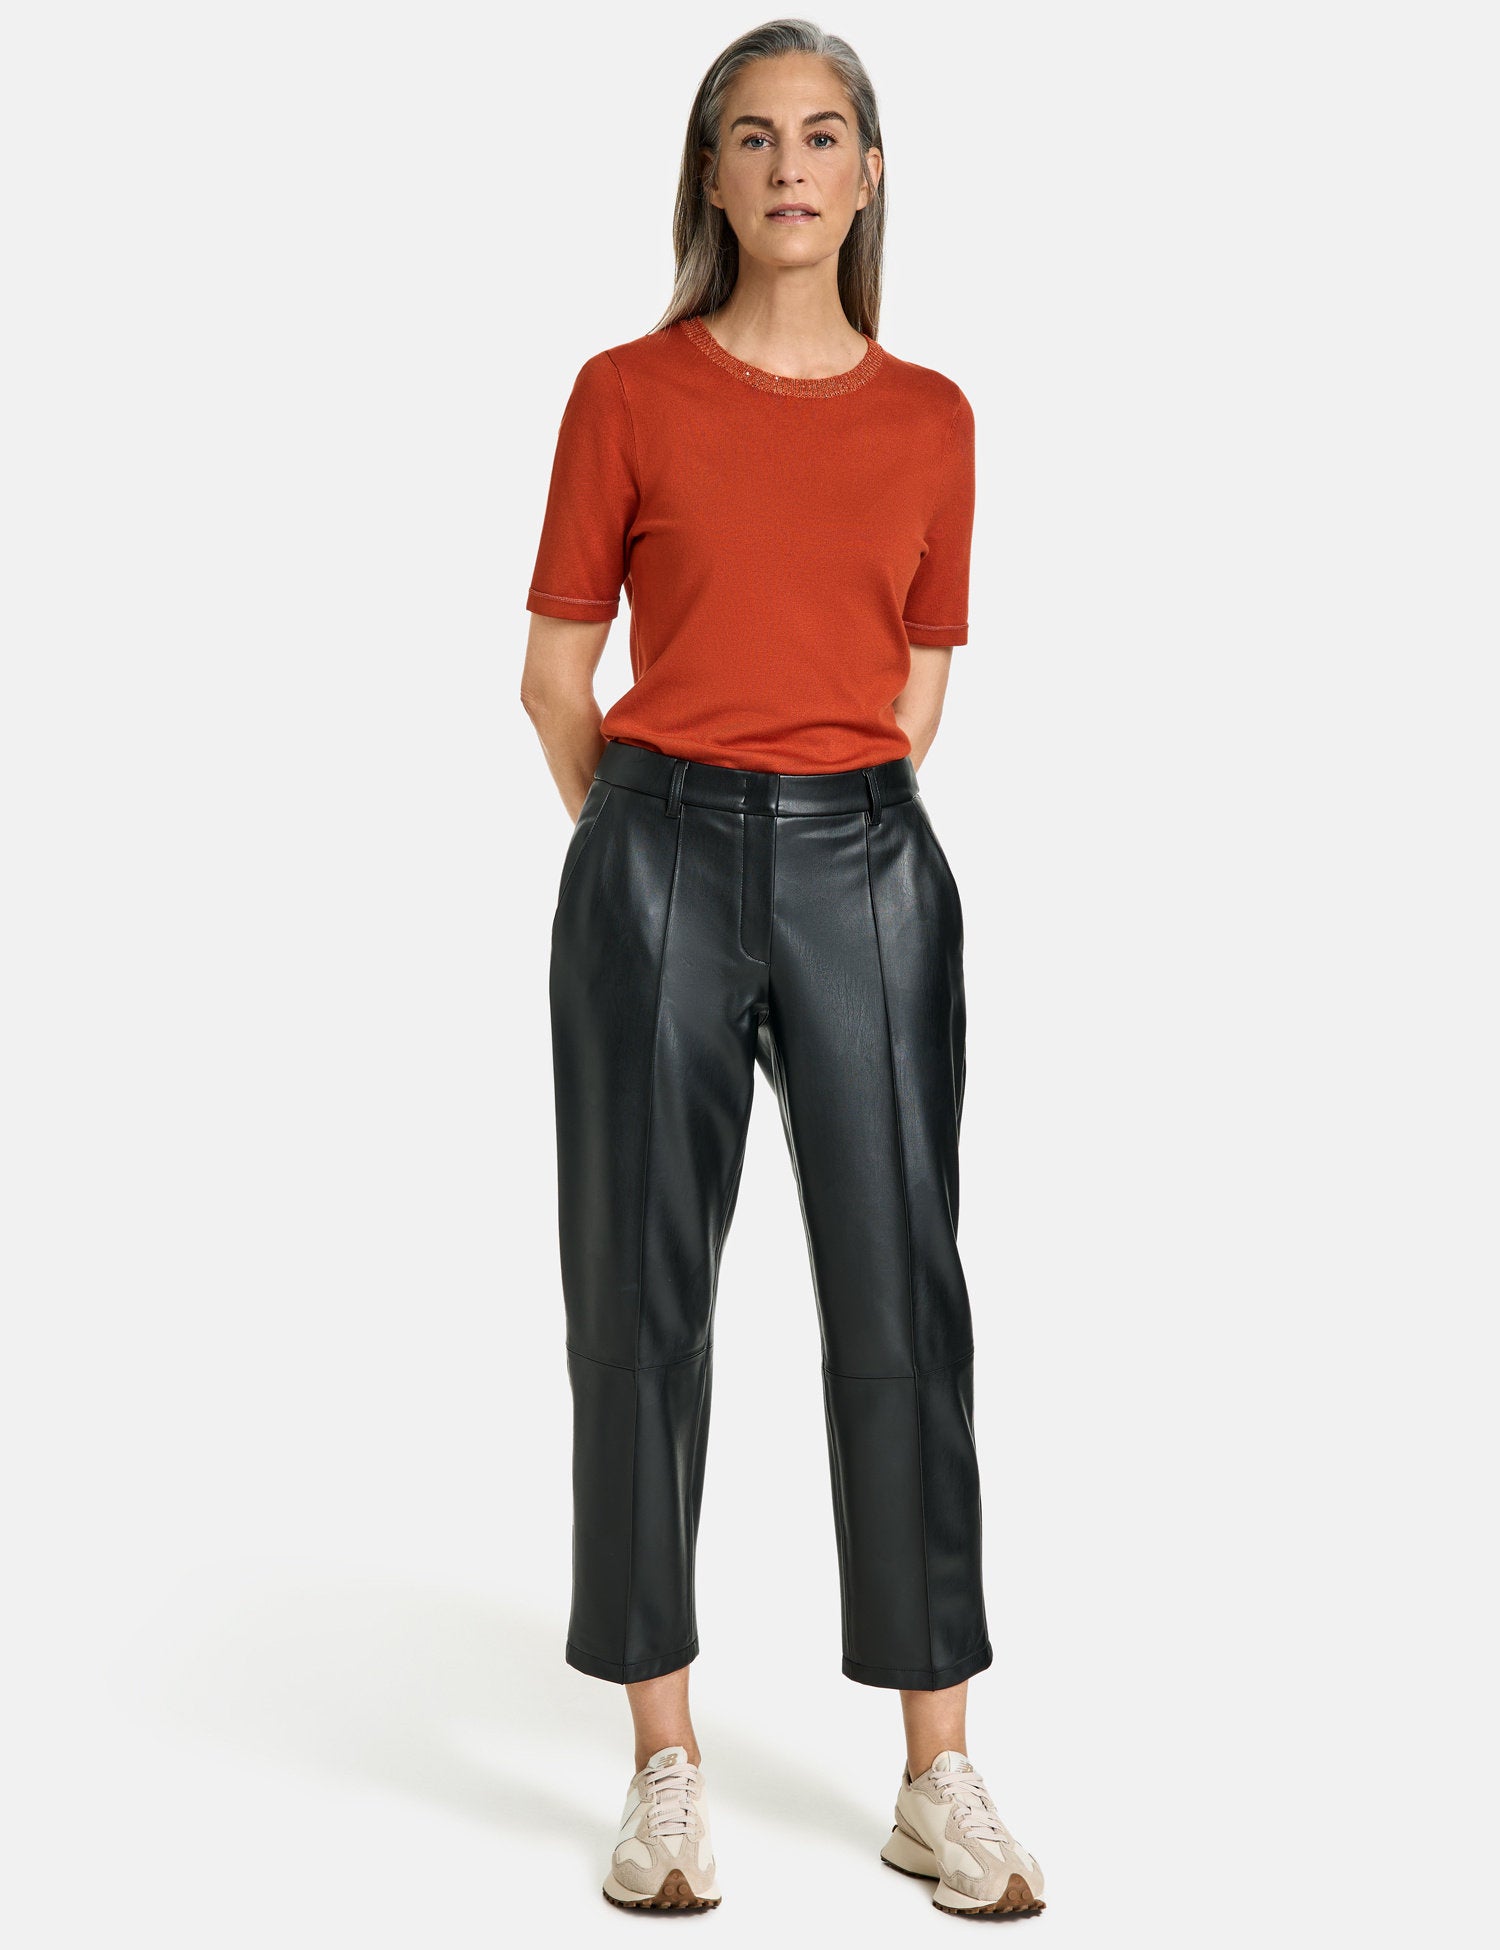 City Style 7/8 Length Faux Leather Trousers_122017-66778_11000_07